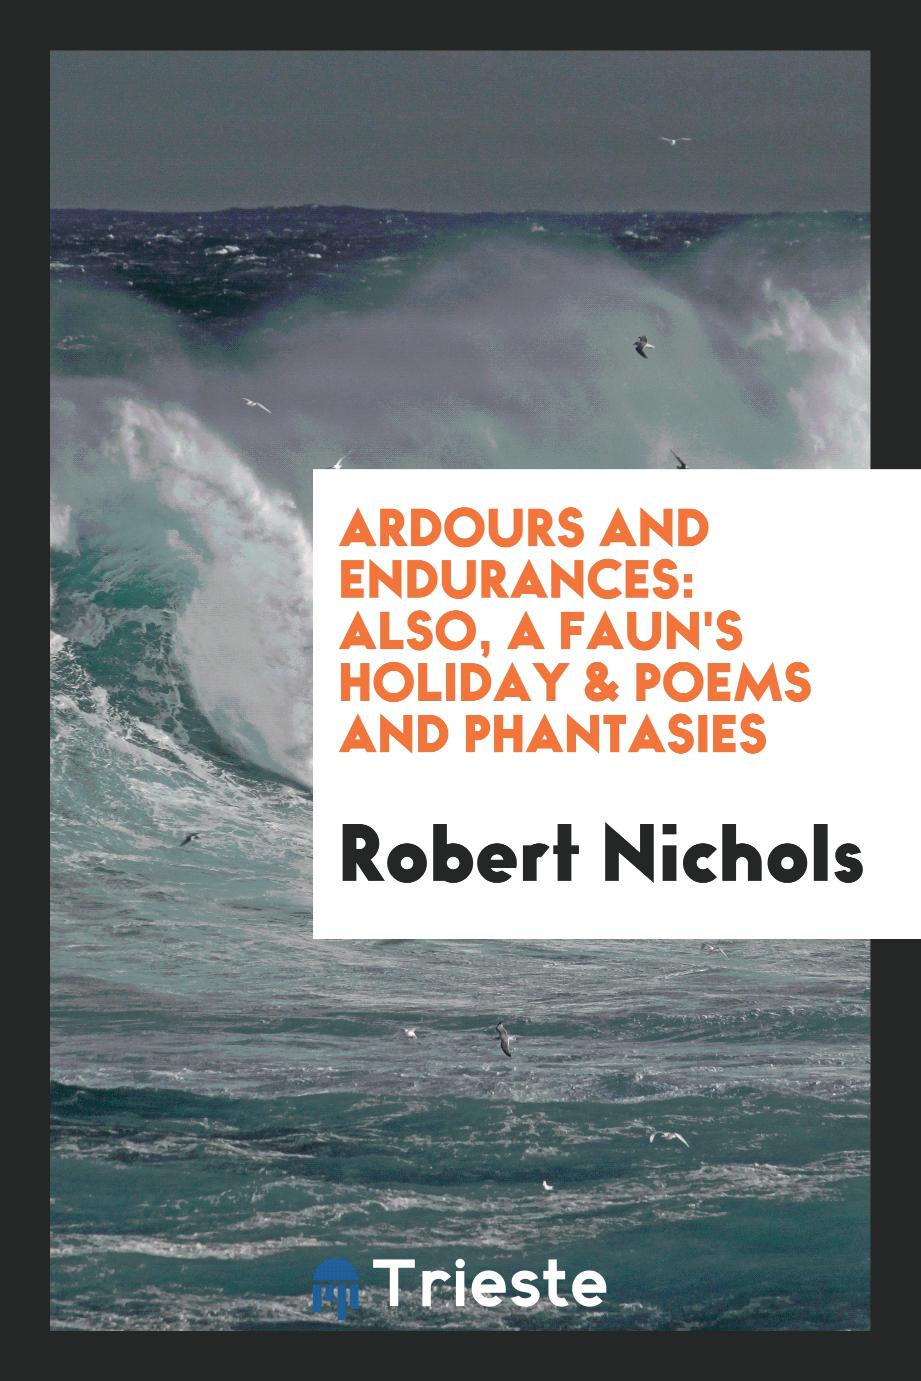 Ardours and Endurances: Also, a Faun's Holiday & Poems and Phantasies